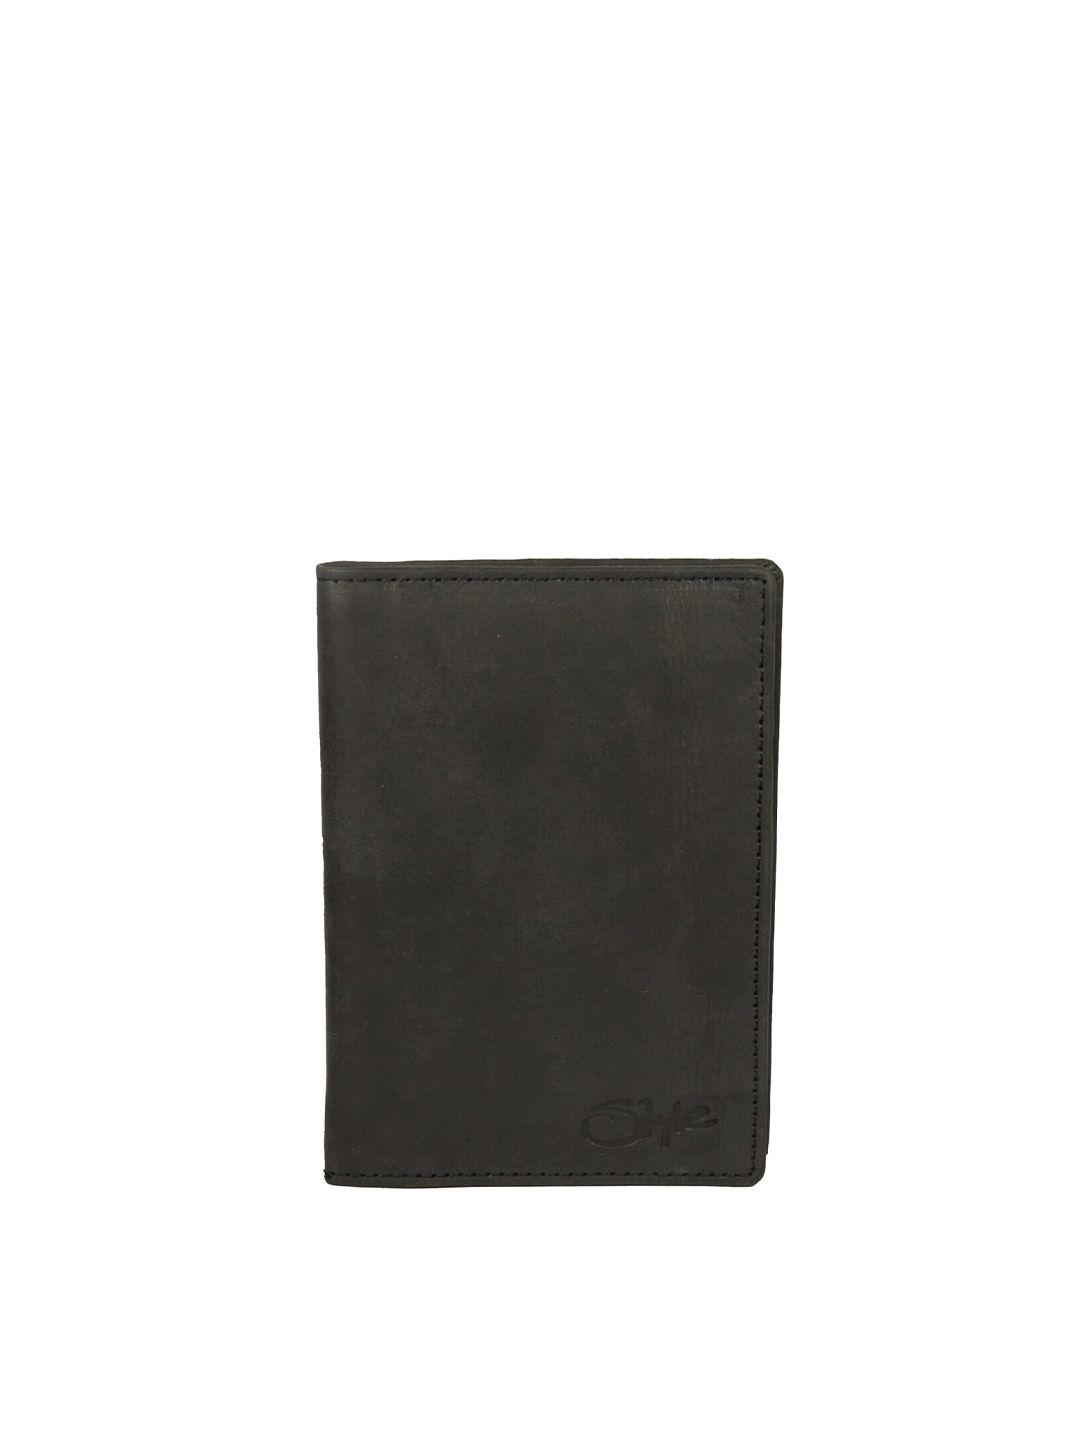 style shoes leather passport holder